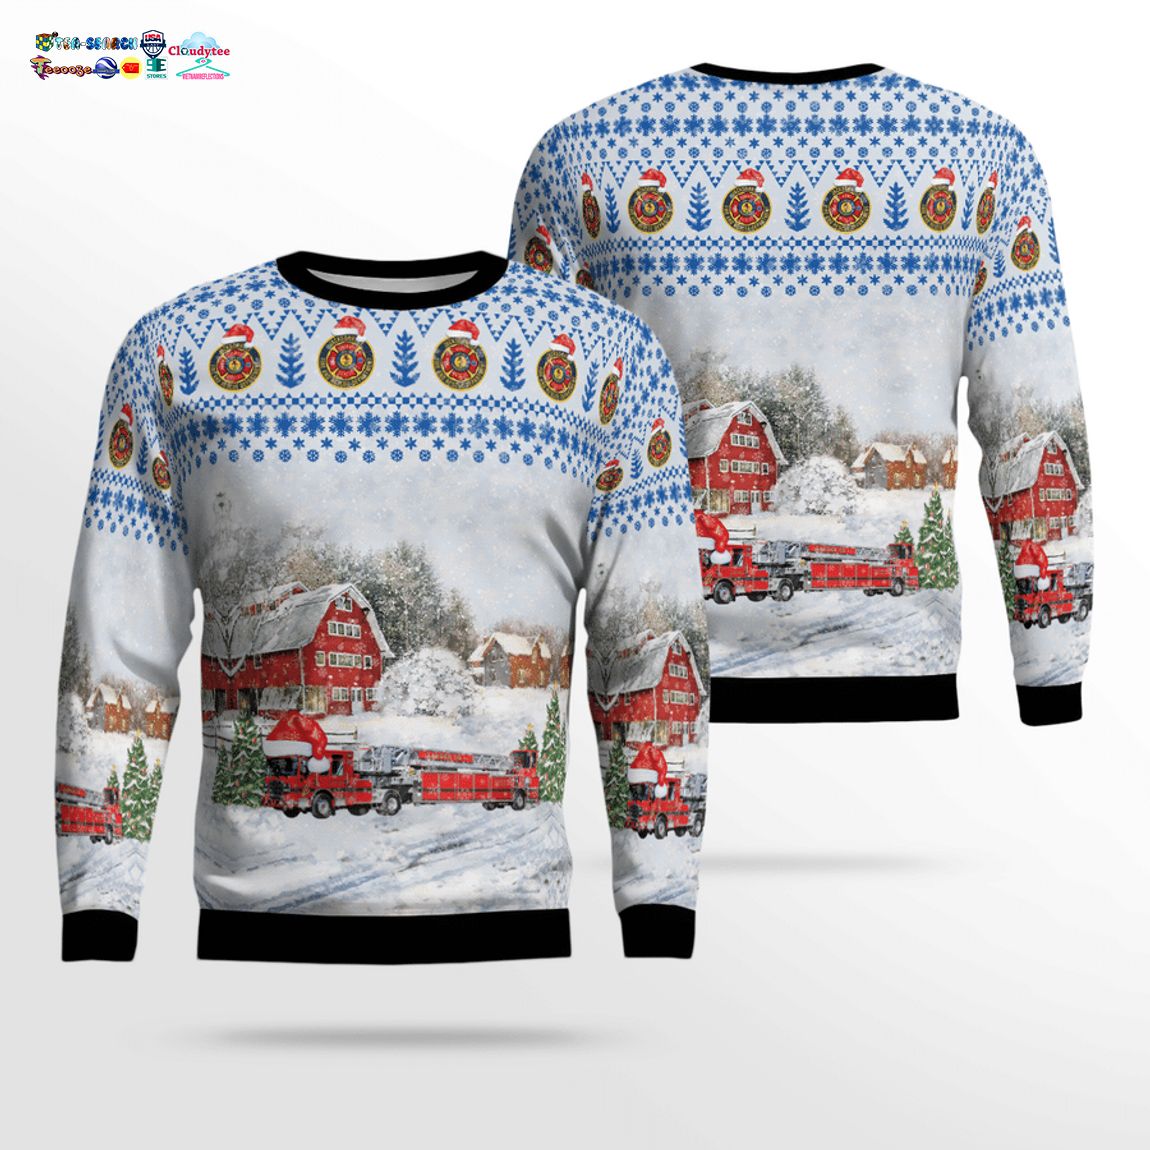 florida-jacksonville-fire-and-rescue-department-ladder-1-3d-christmas-sweater-1-419mL.jpg